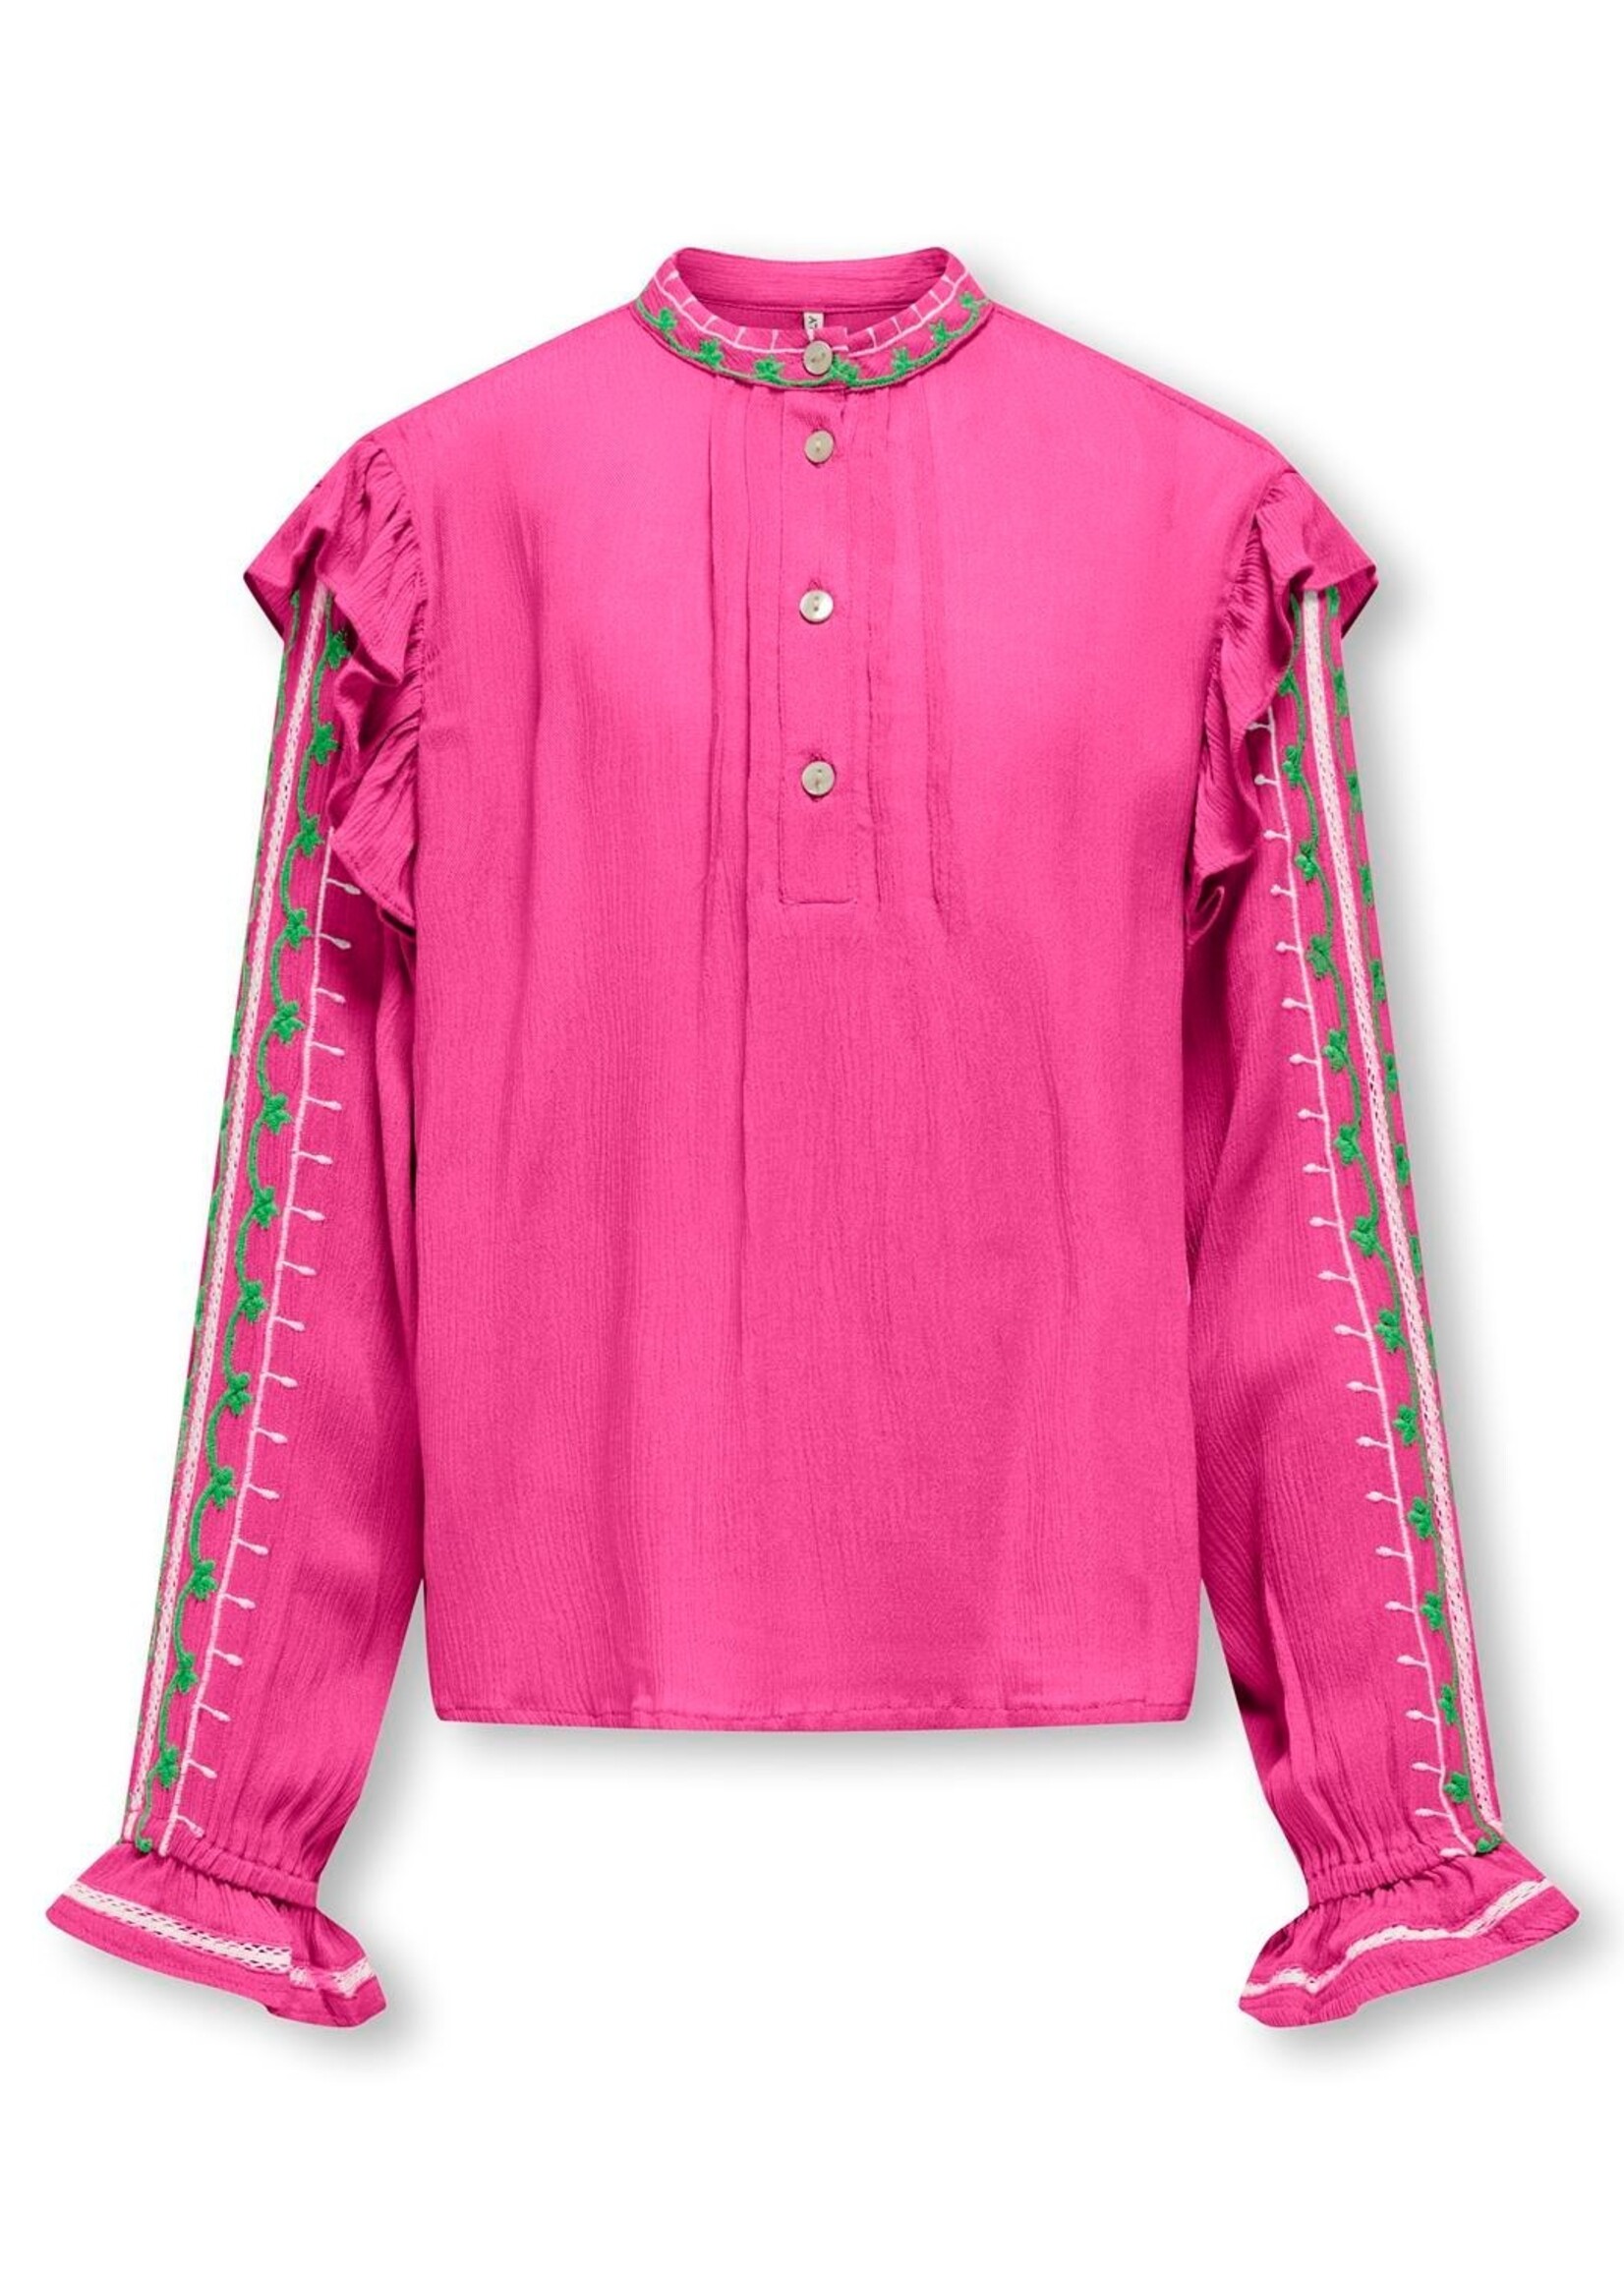 KIDS ONLY Ada Embroidery Shirt Raspberry Rose 15320053